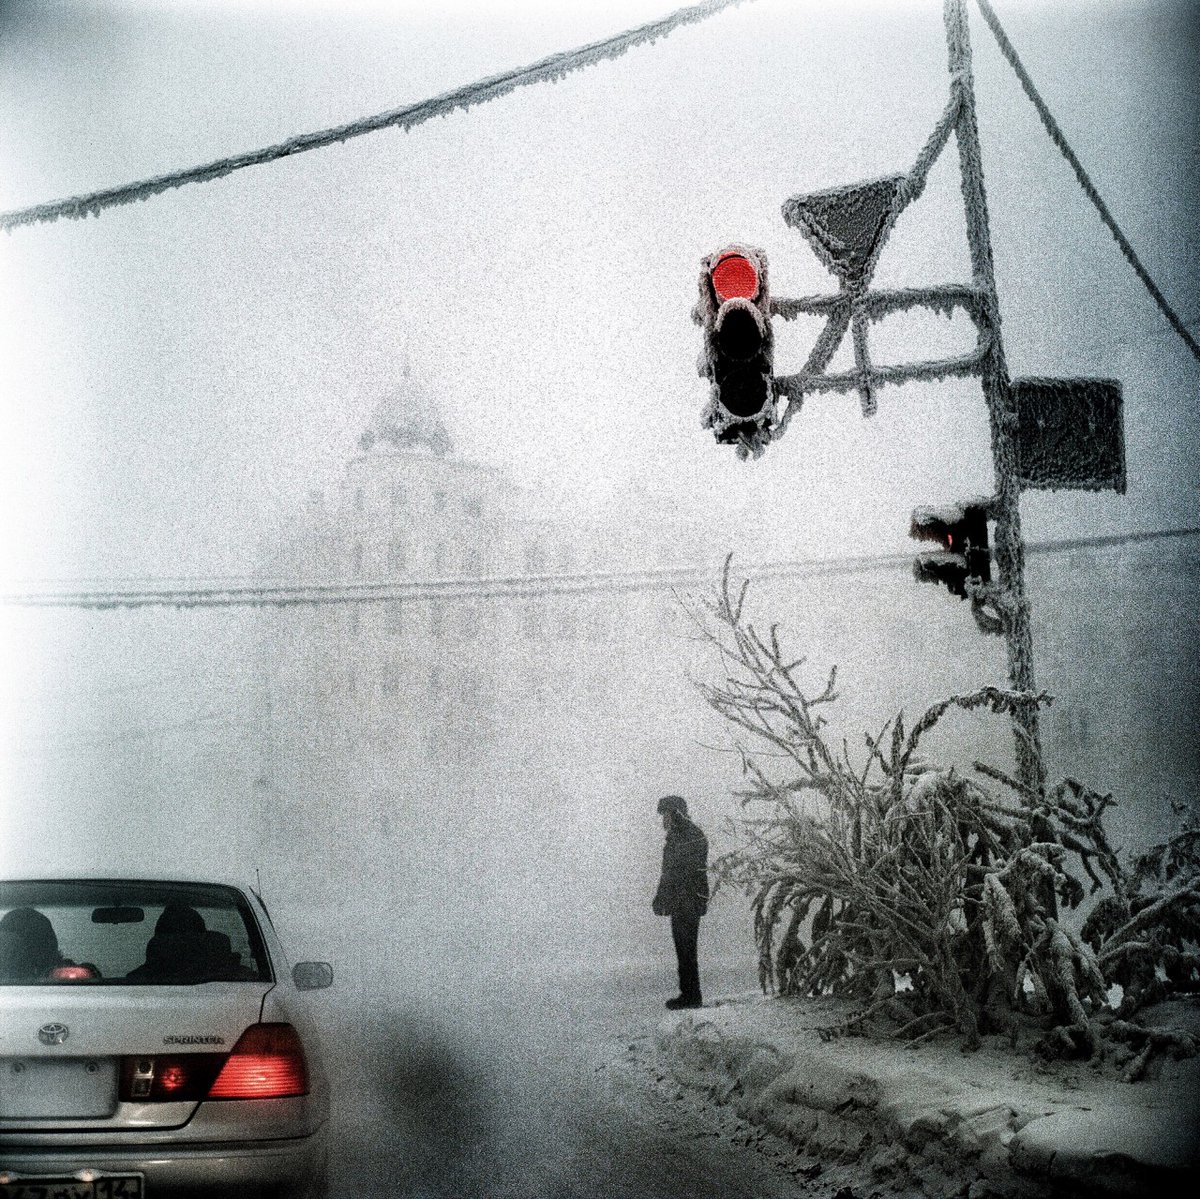 Yakutsk, the coldest city in the world, as photographed by Steeve Iuncker—a few more here  https://instagram.com/p/CKv1r0ejkn5/?utm_source=ig_web_copy_link